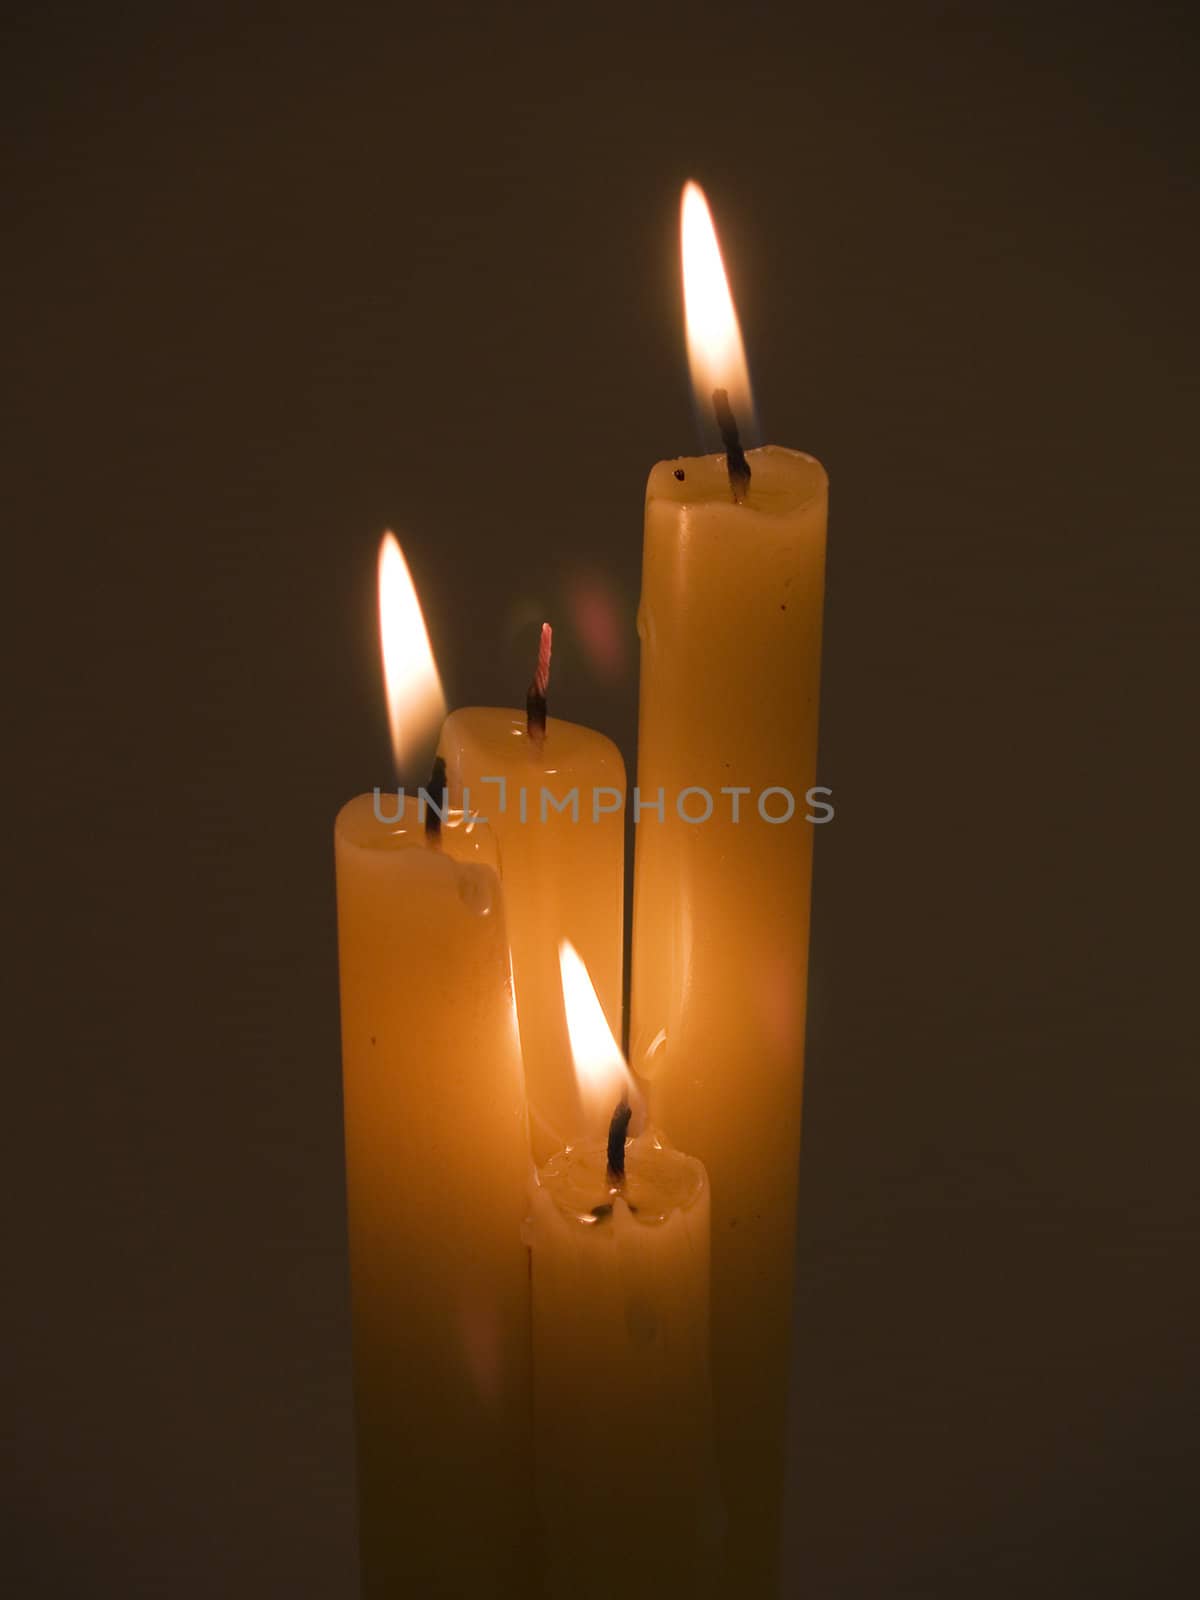 Candles by lauria